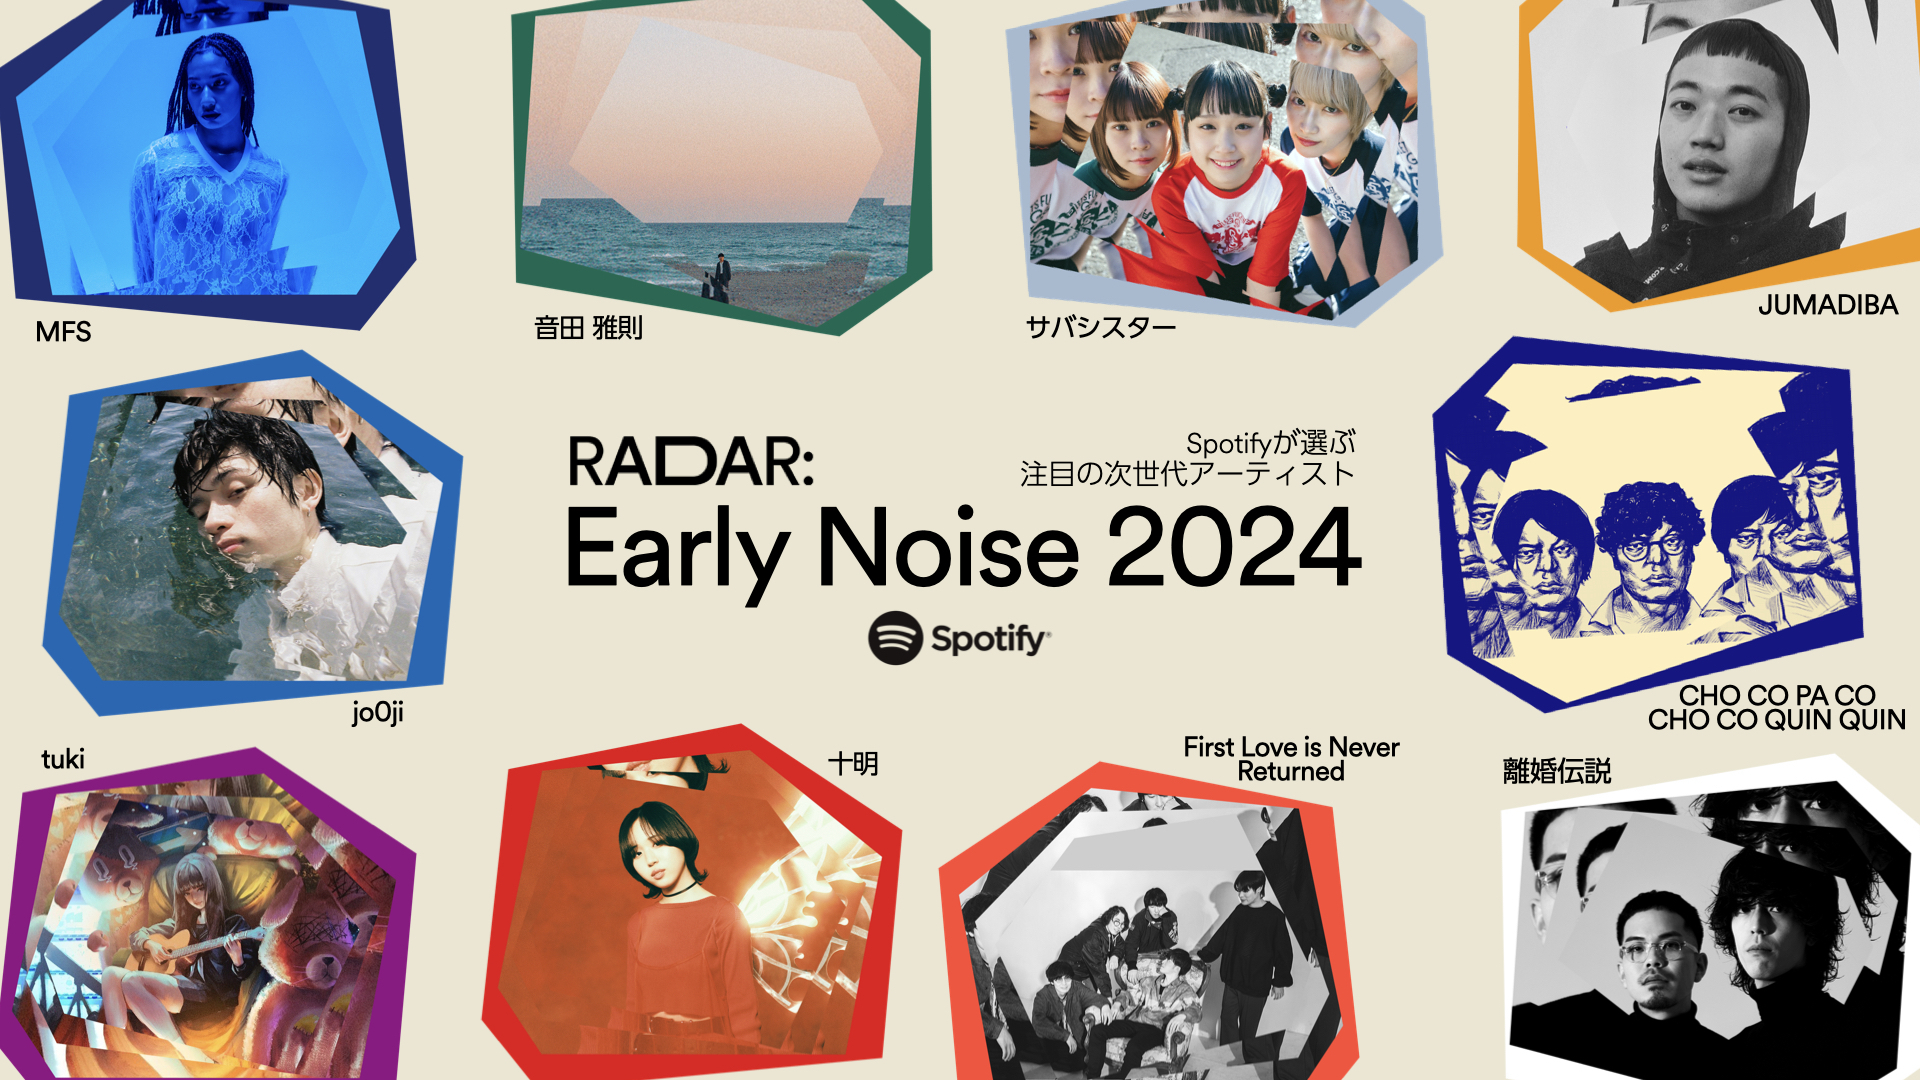 Spotify Unveils RADAR Early Noise 2024 Hot Picks For The Next Big Artists 